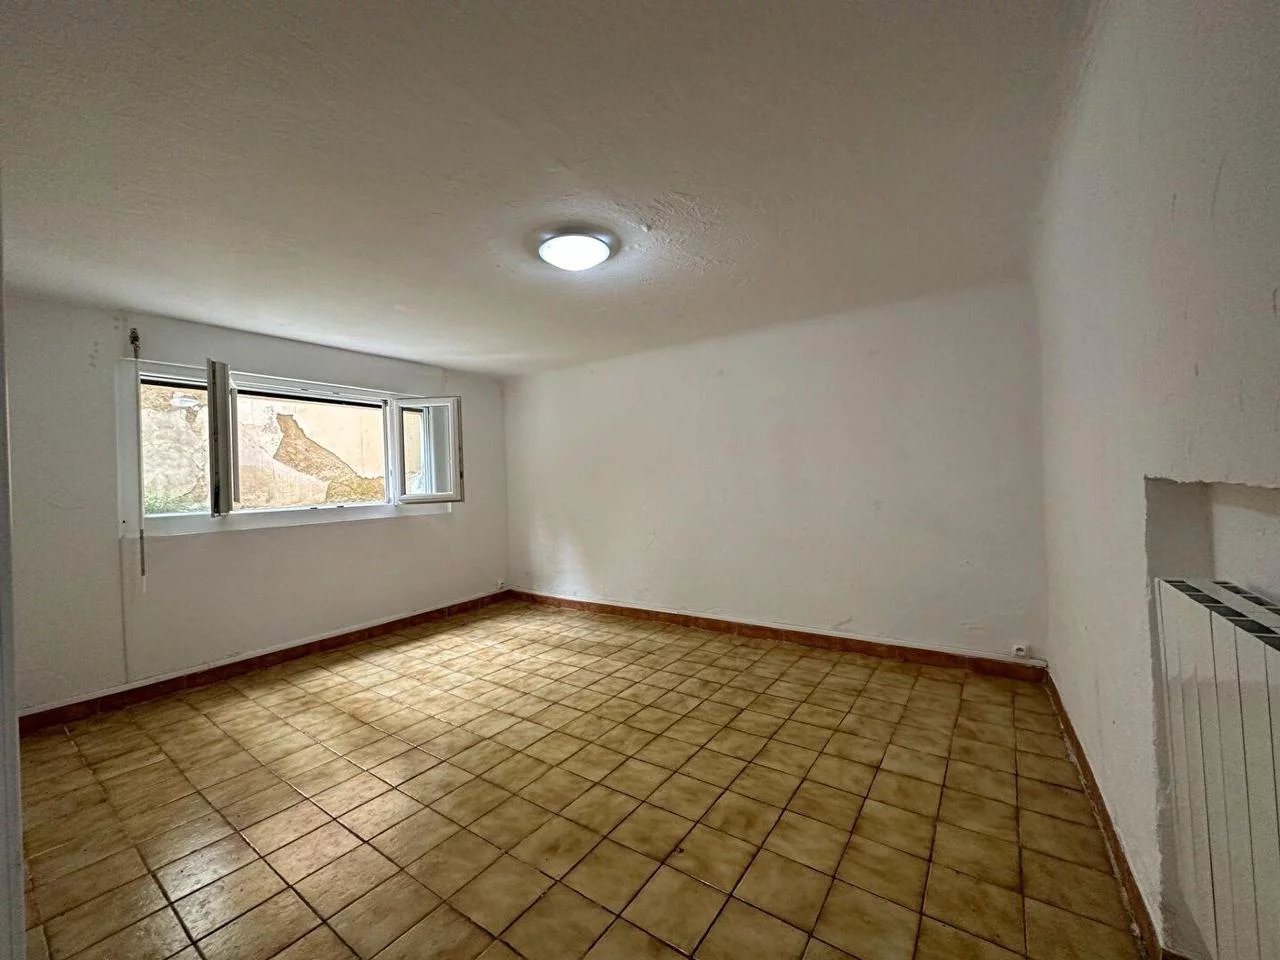 Appartement  1 Rooms 23.55m2  for sale    85 000 €